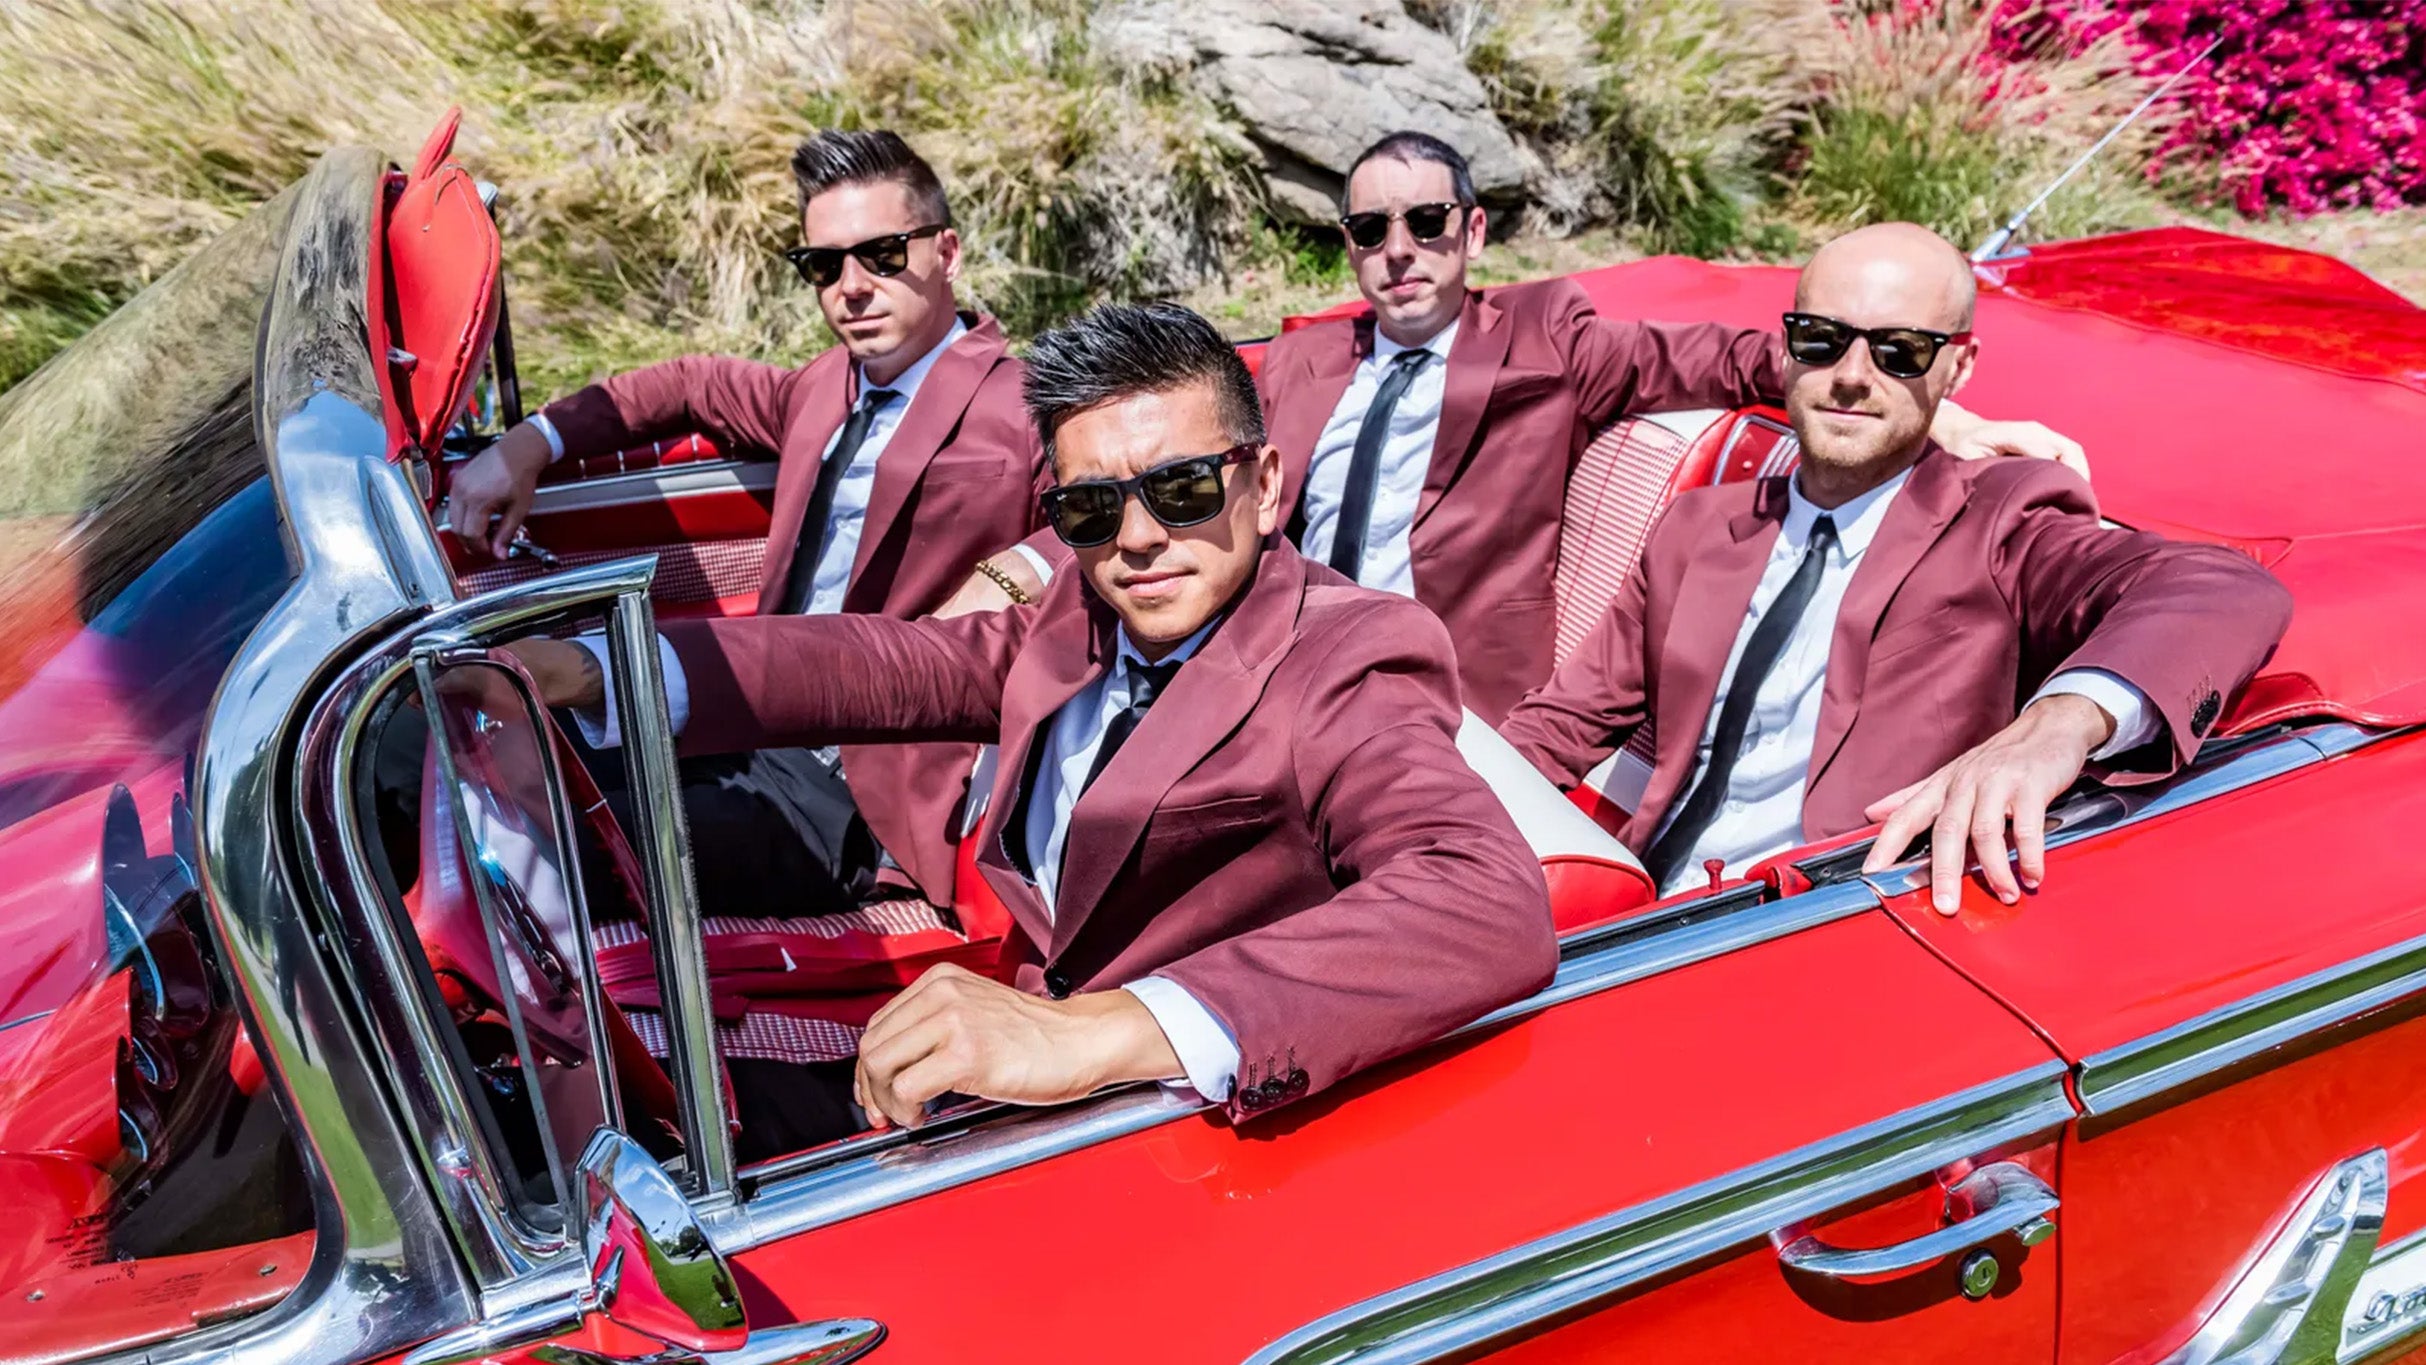 The Dreamboats in Stateline promo photo for Ticketmaster presale offer code